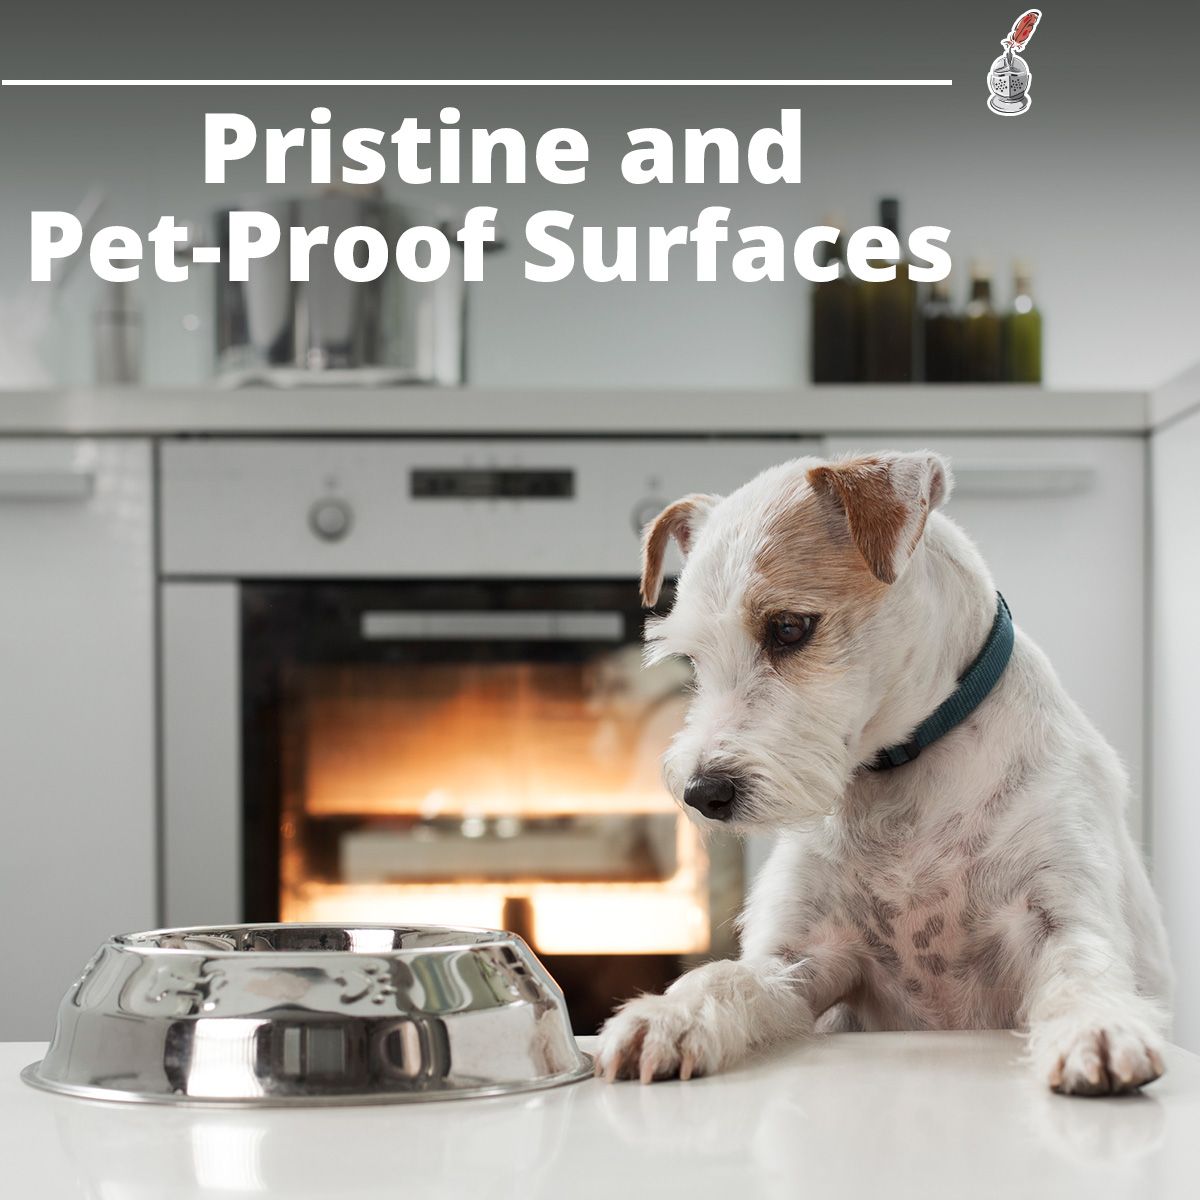 Pristine and Pet-Proof Surfaces